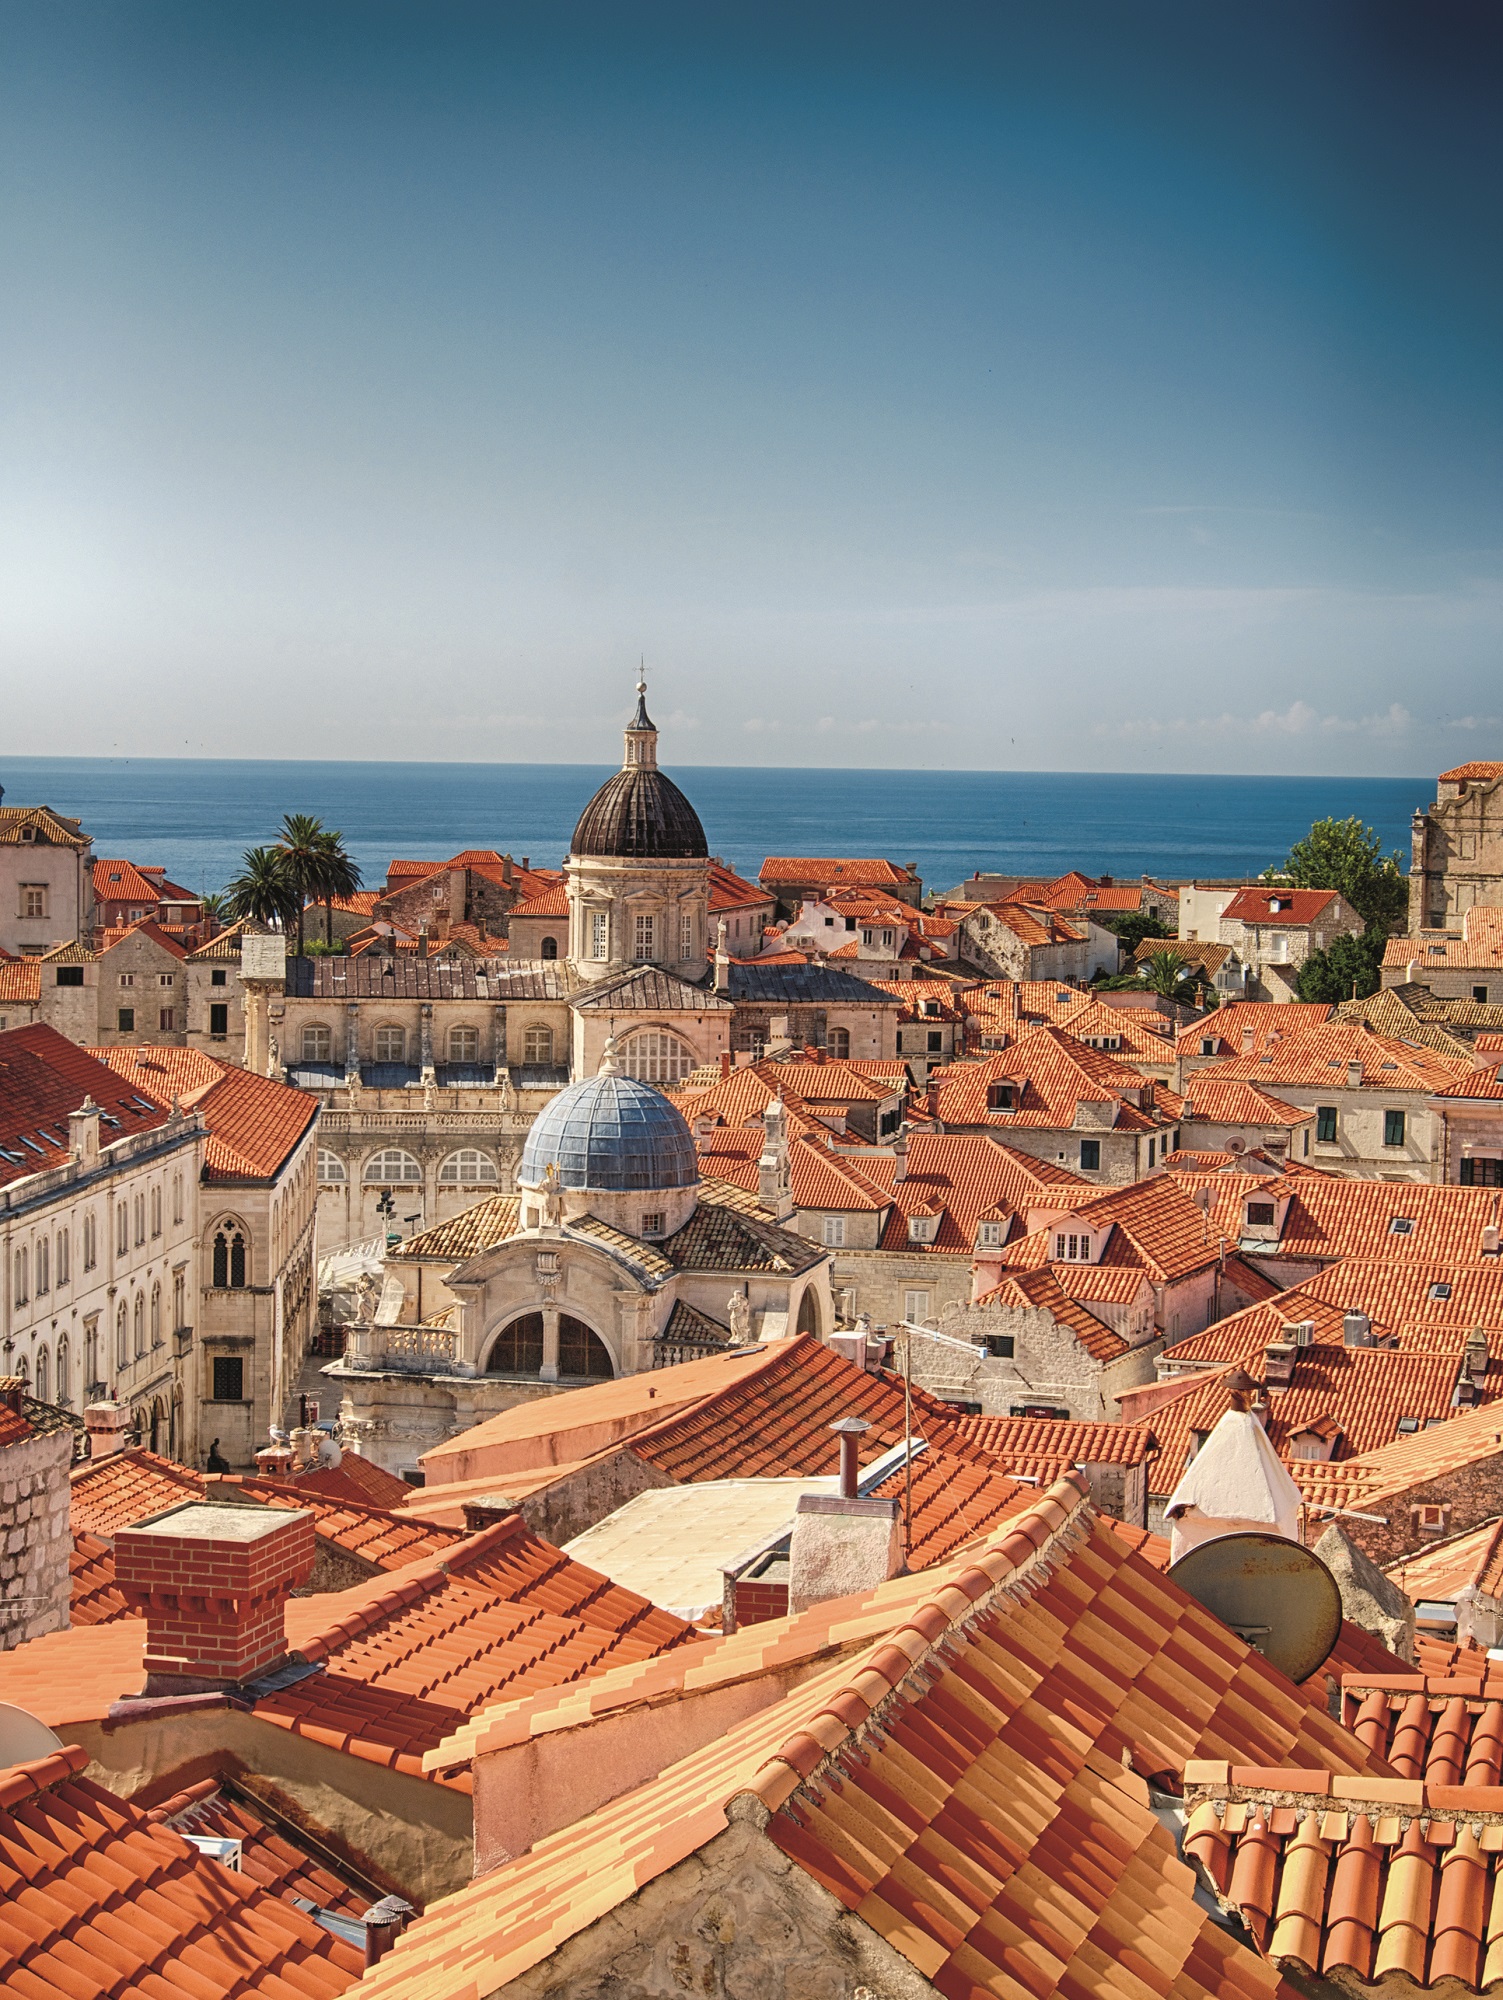 Red Roofs Of Dubrovnik Old Town, Croatia